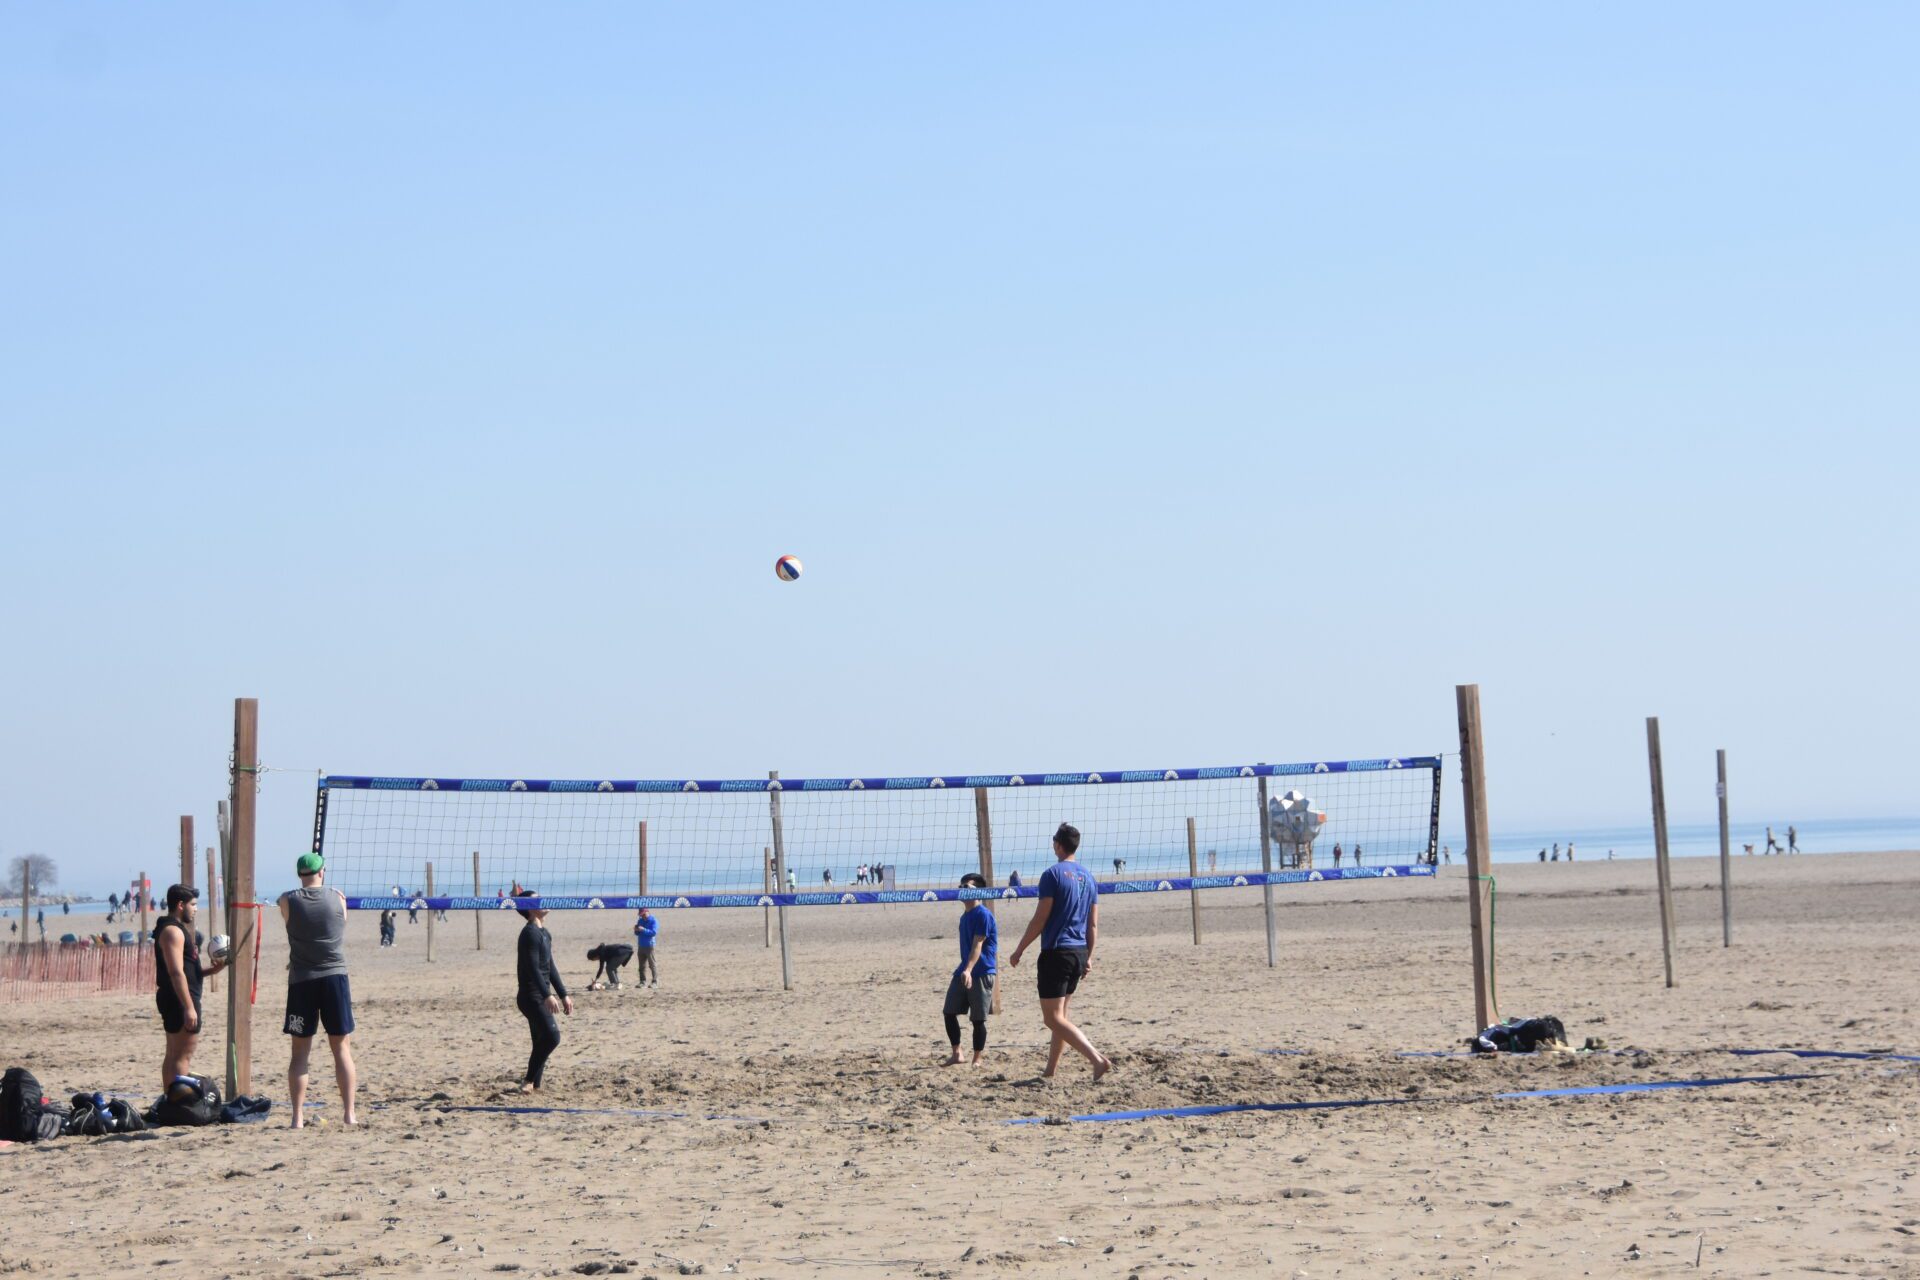 A group of boys playing volleyball as one of them prepares to hit the ball